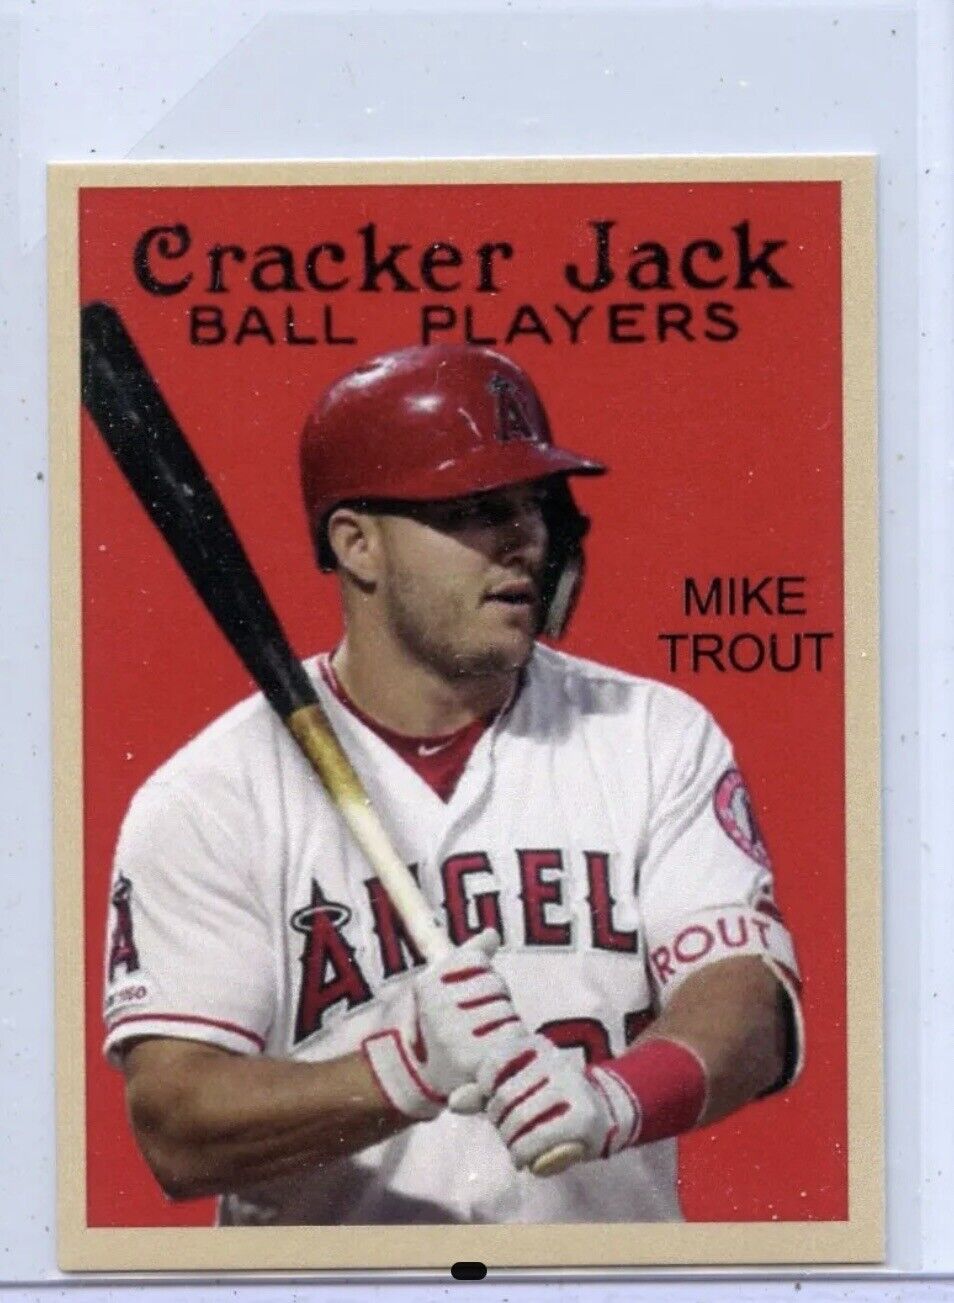 2021 Cracker Jack Mike Trout Card #7  Mint NrMint Hard to Find 